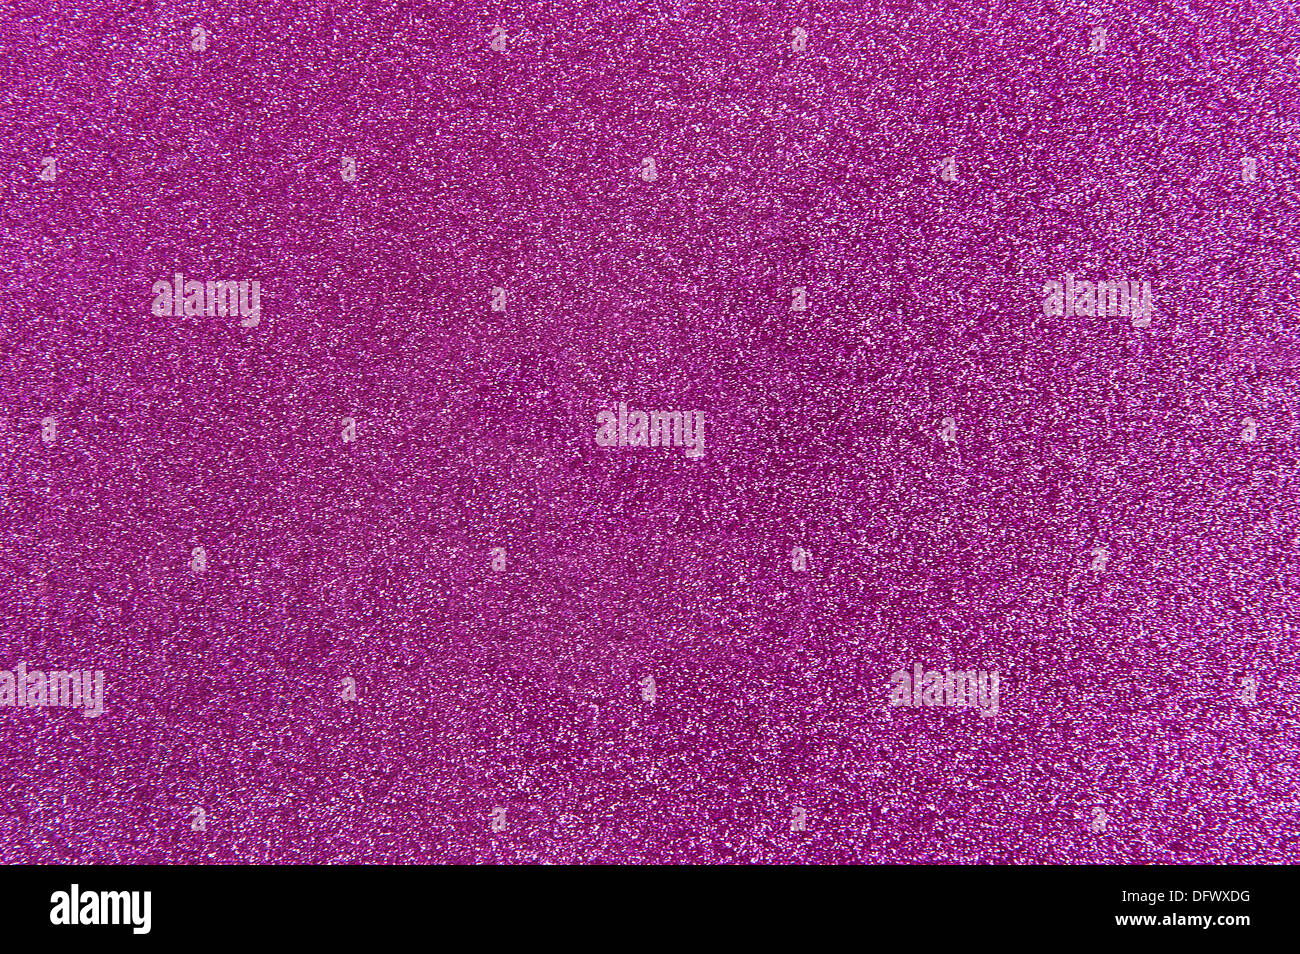 Abstract pink glitter background Stock Photo